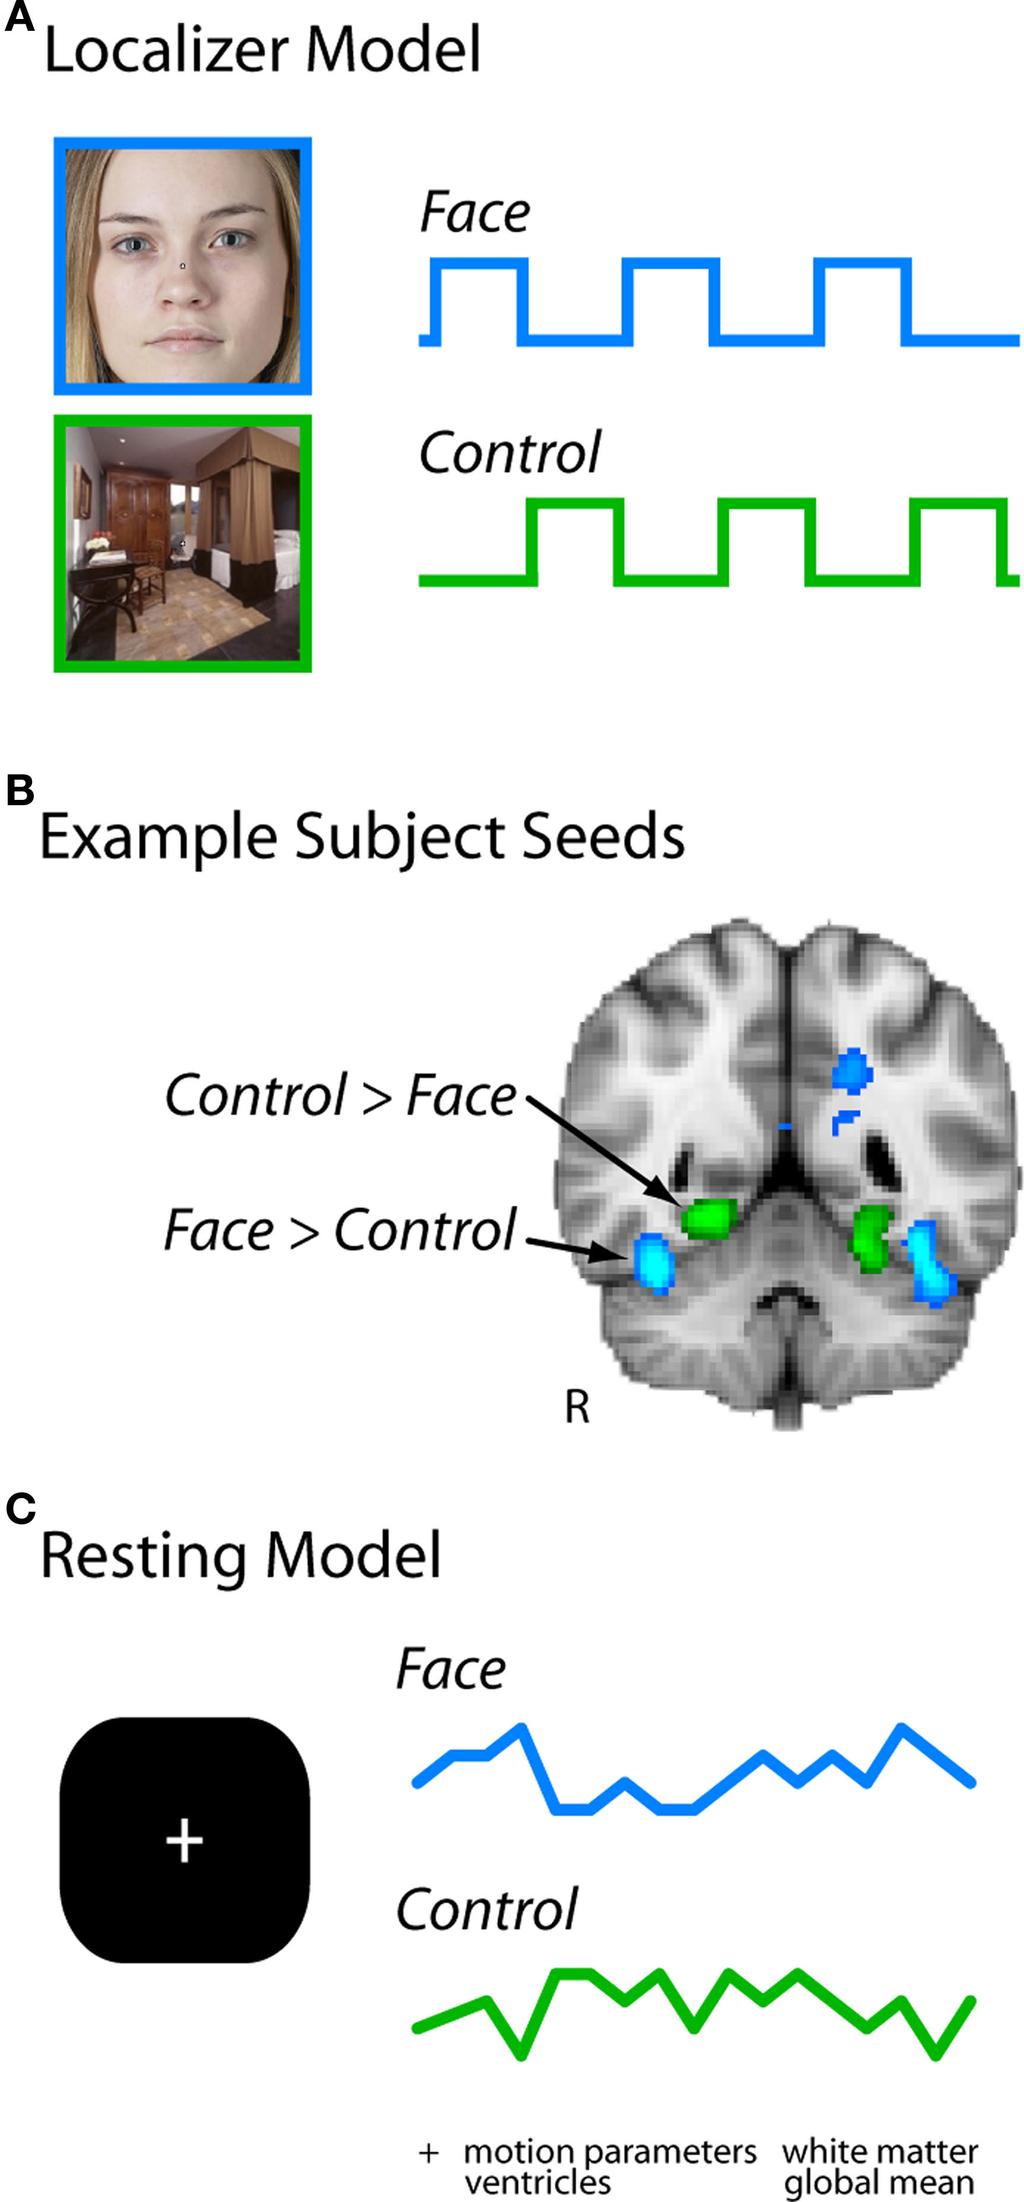 To analyze resting functional connectivity, the FG and control seeds were overlaid on the preprocessed resting data (see Figure 1).